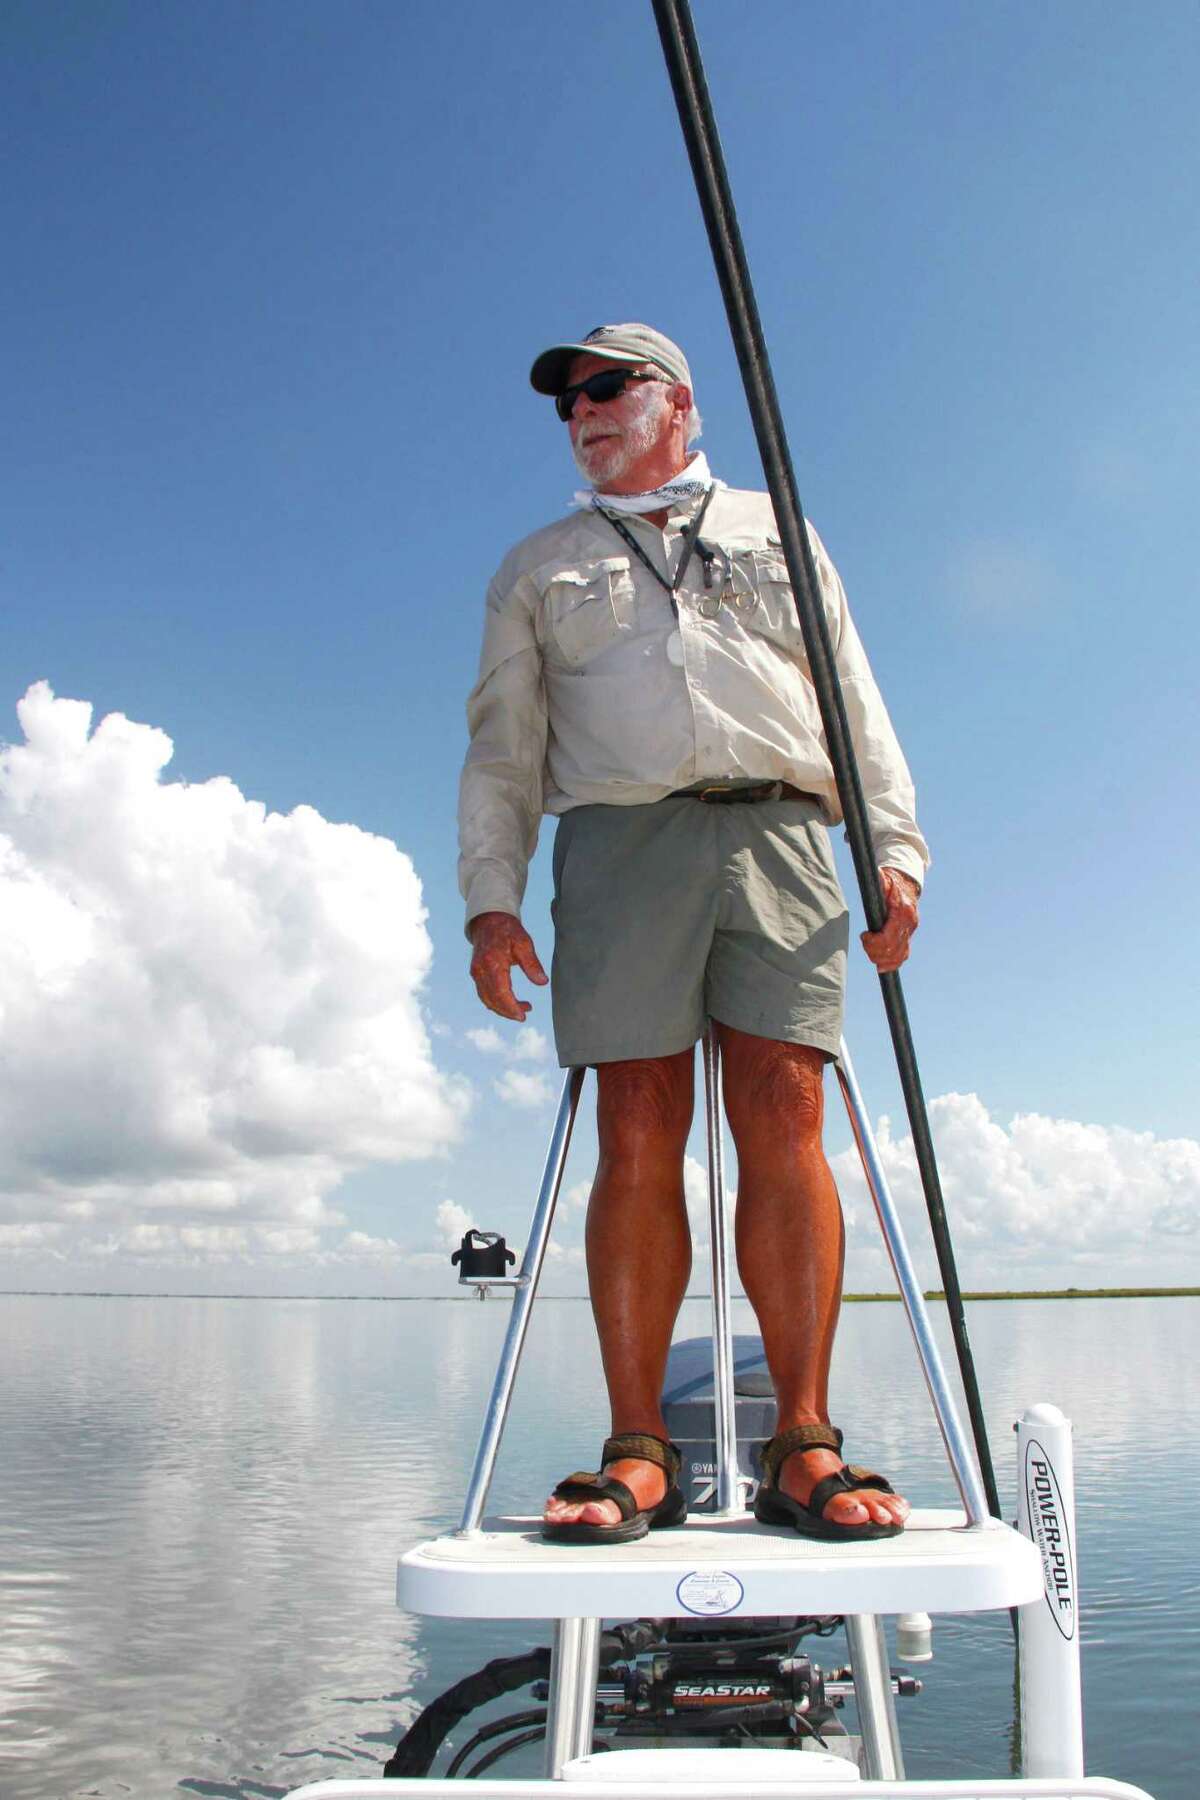 Chuck Naiser, who has spent more than 50 years fishing and guiding anglers on the bays of Texas central coast, takes a break from poling his skiff to search the shallow flats for signs of feeding redfish.